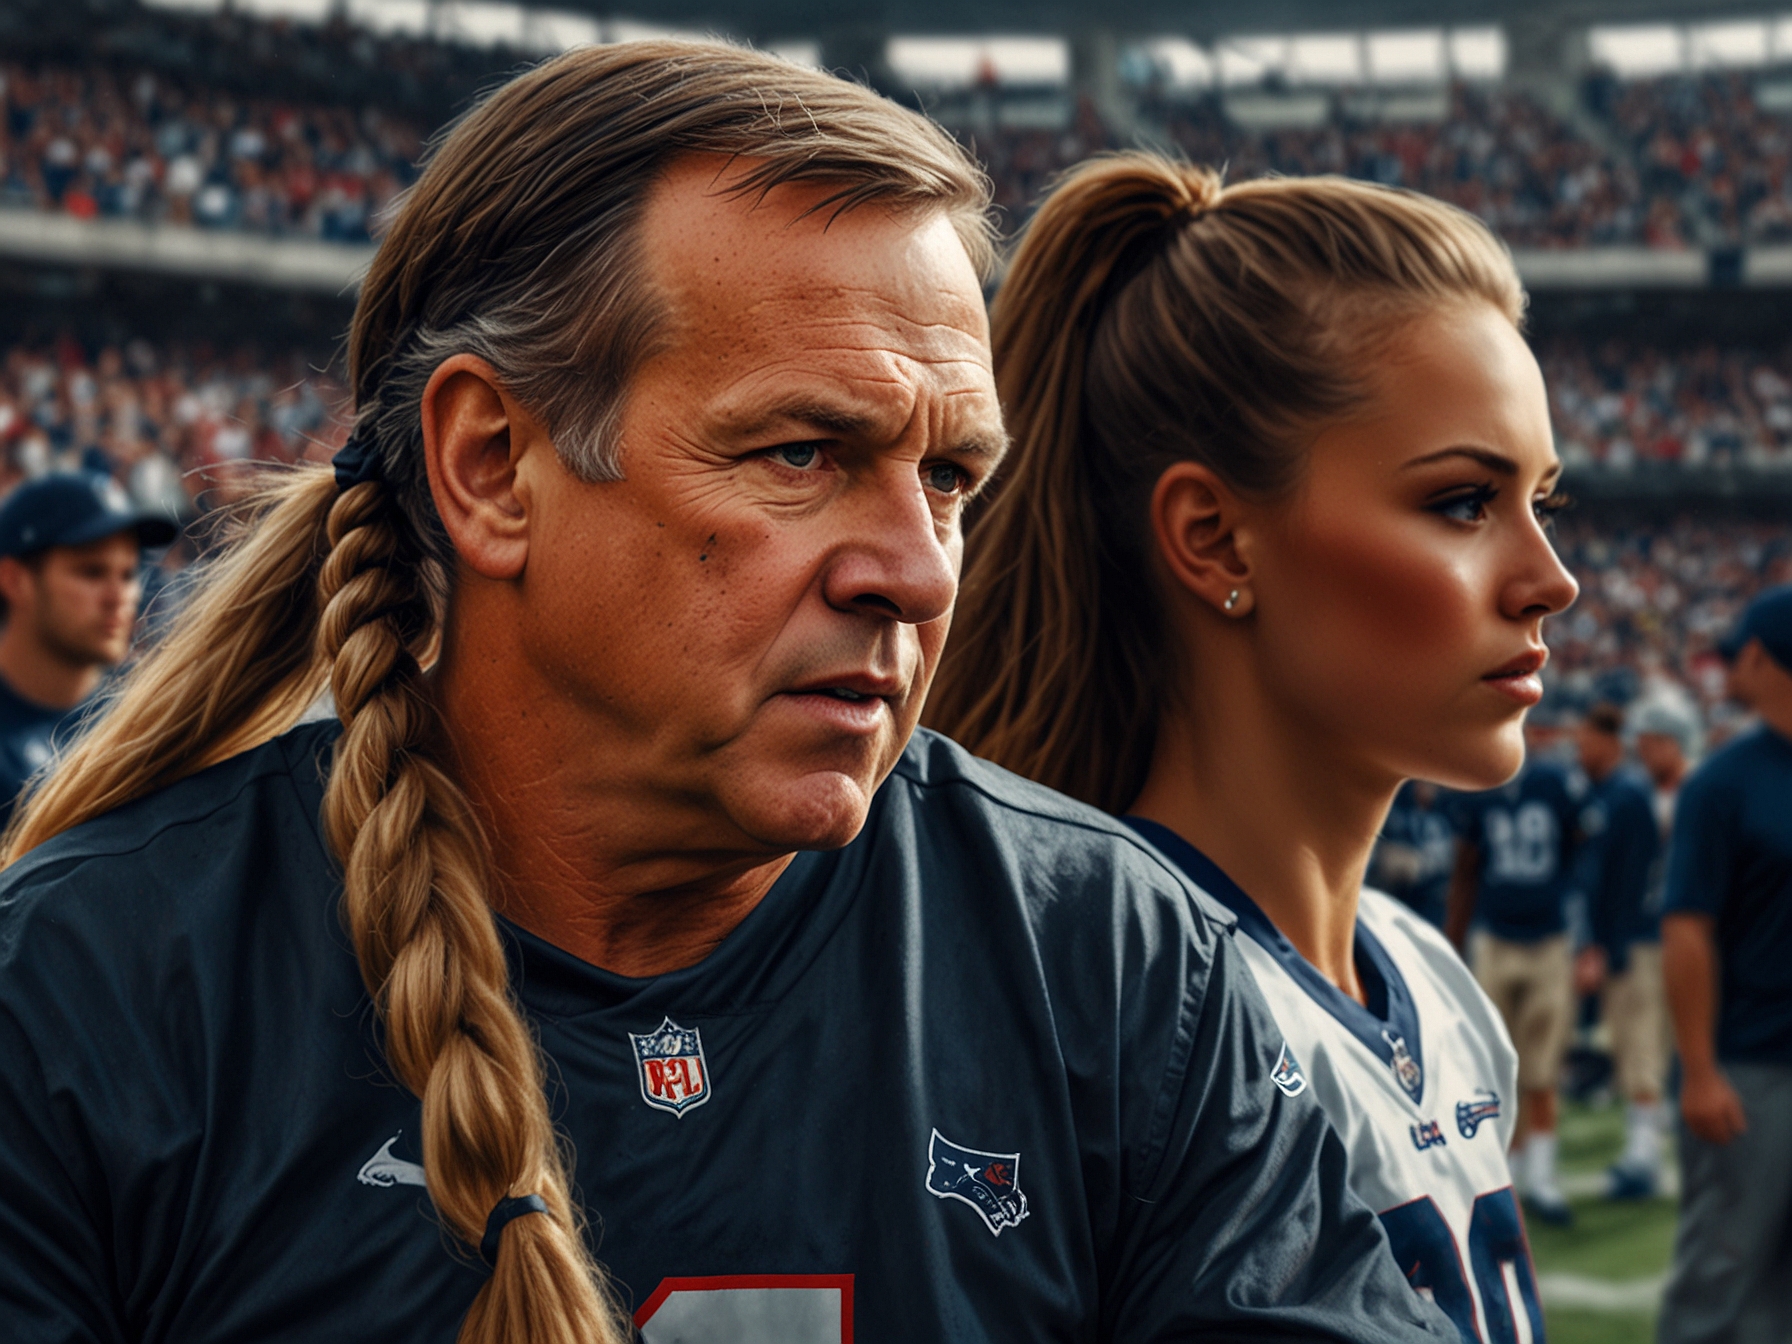 A split image showing Bill Belichick on the sidelines of an NFL game and a young cheerleader performing, highlighting the contrasting public and private lives of high-profile figures.